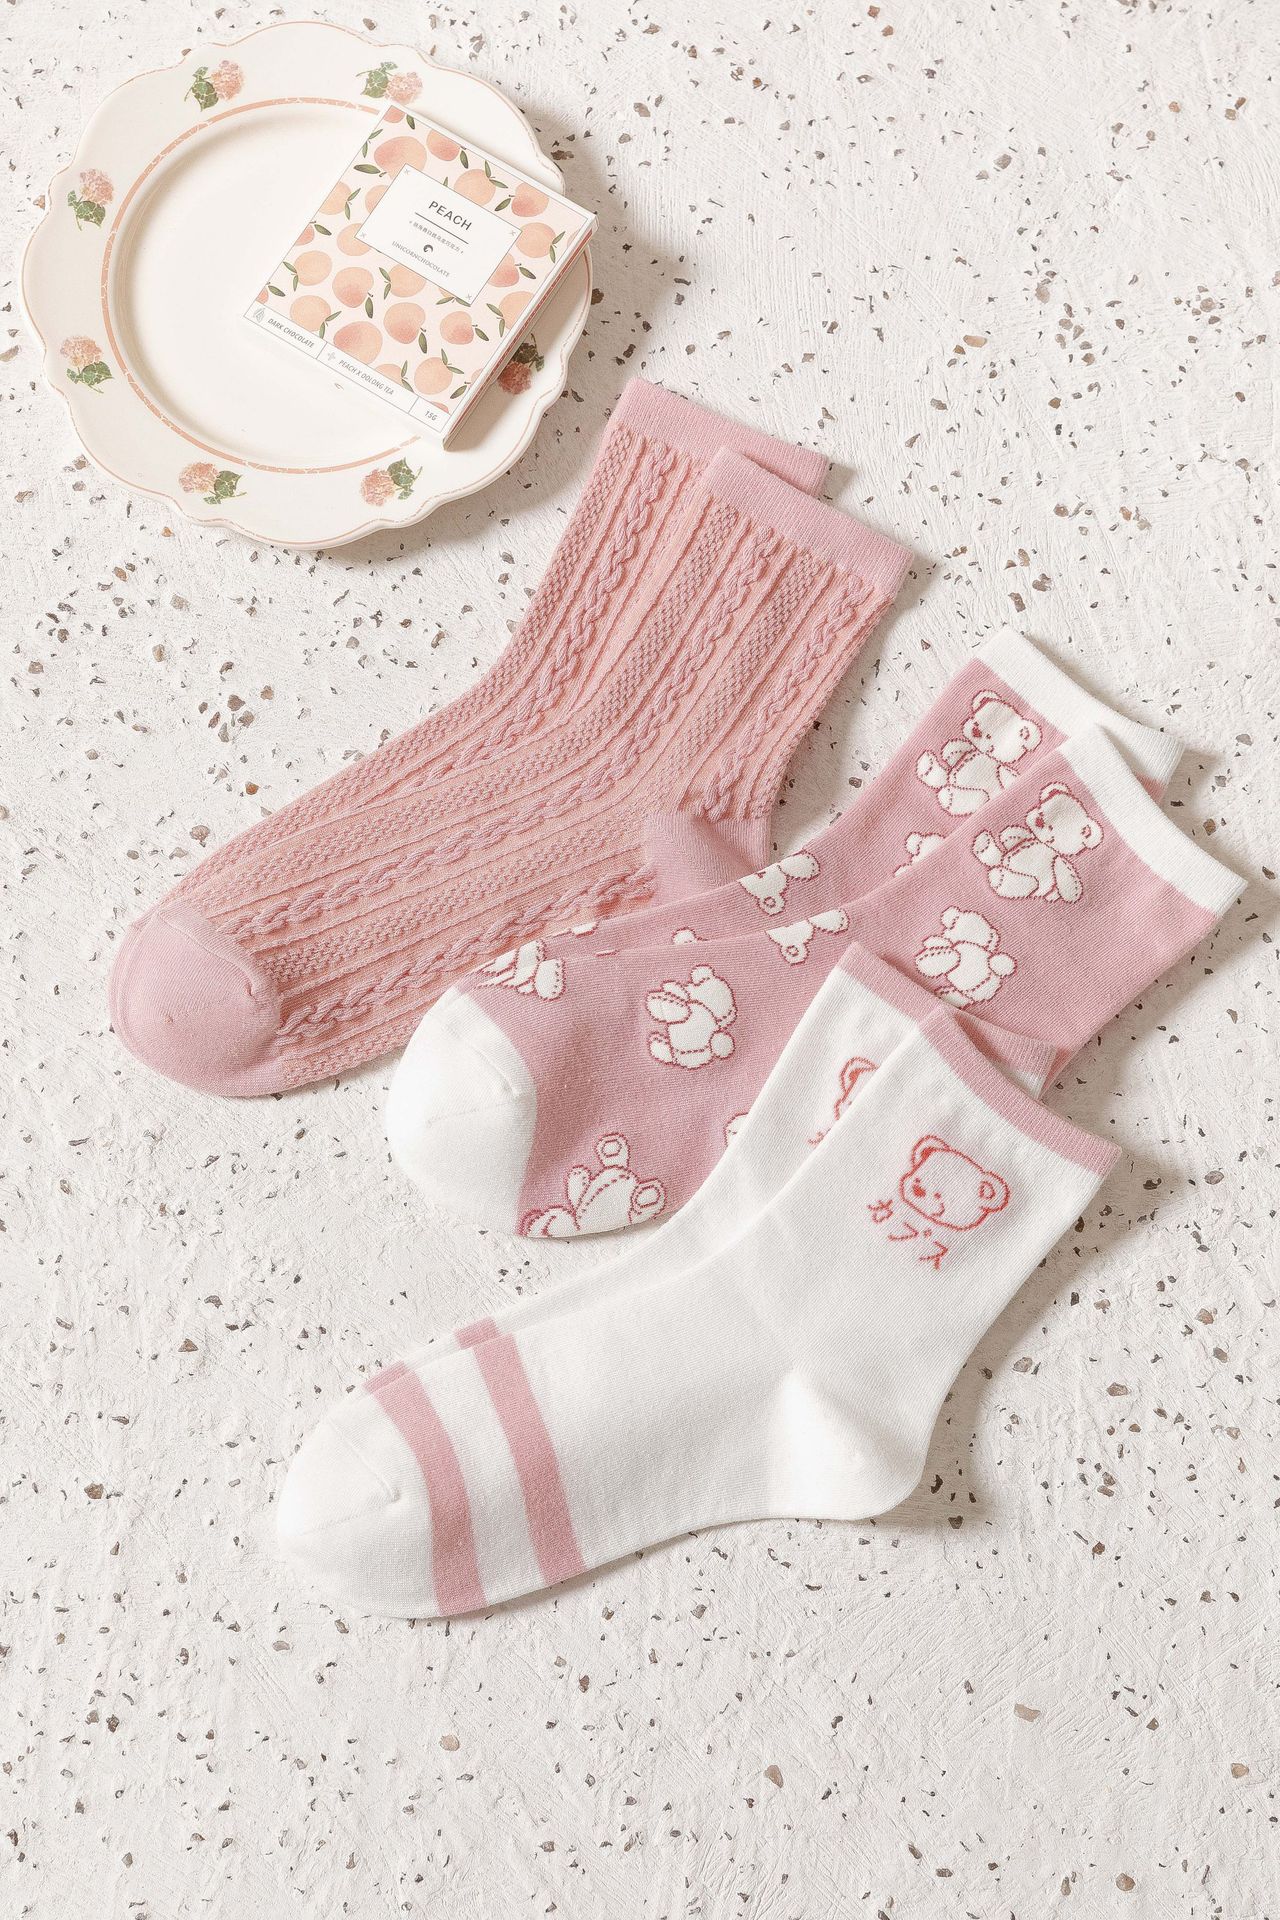 Nouvelle Série Rose Ours Mignon Ours Chaussettes À Tube Court En Gros Nihaojewelry display picture 1